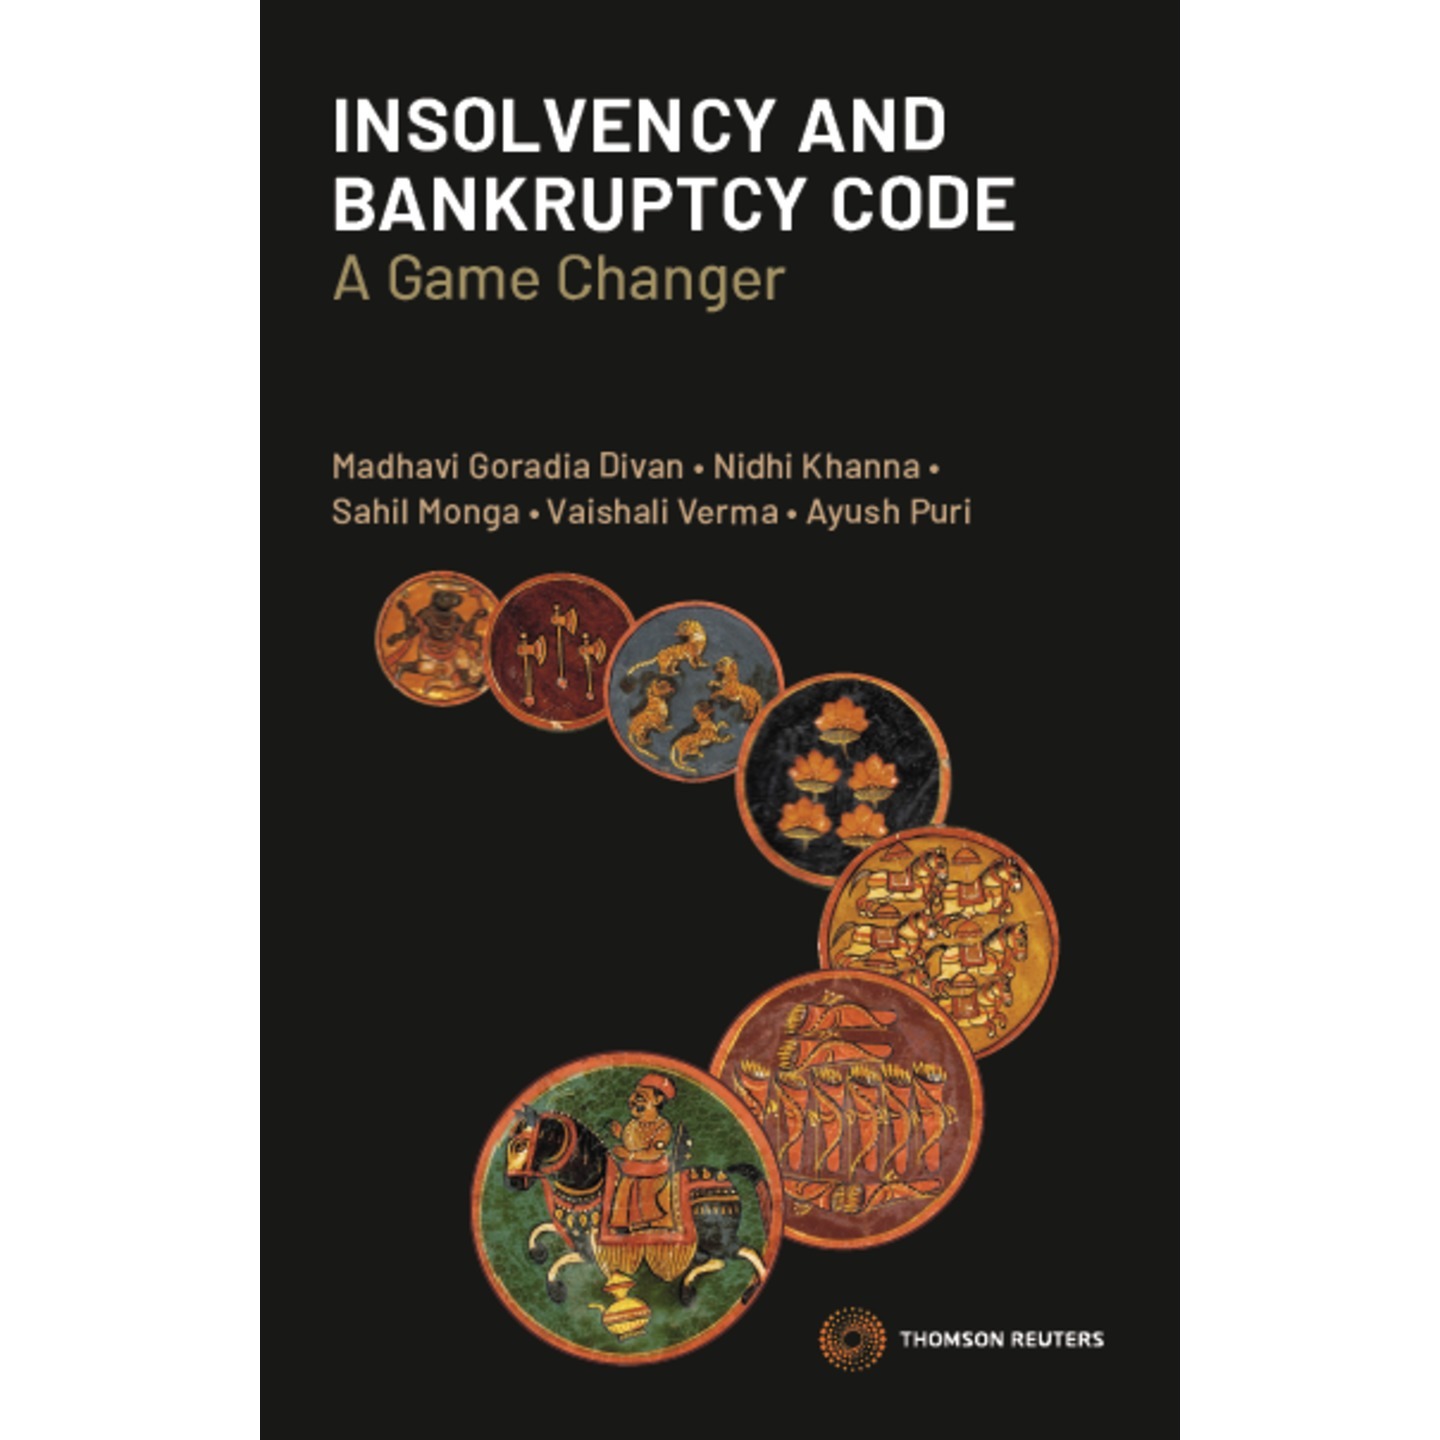 Insolvency and Bankruptcy Code: A Game Changer